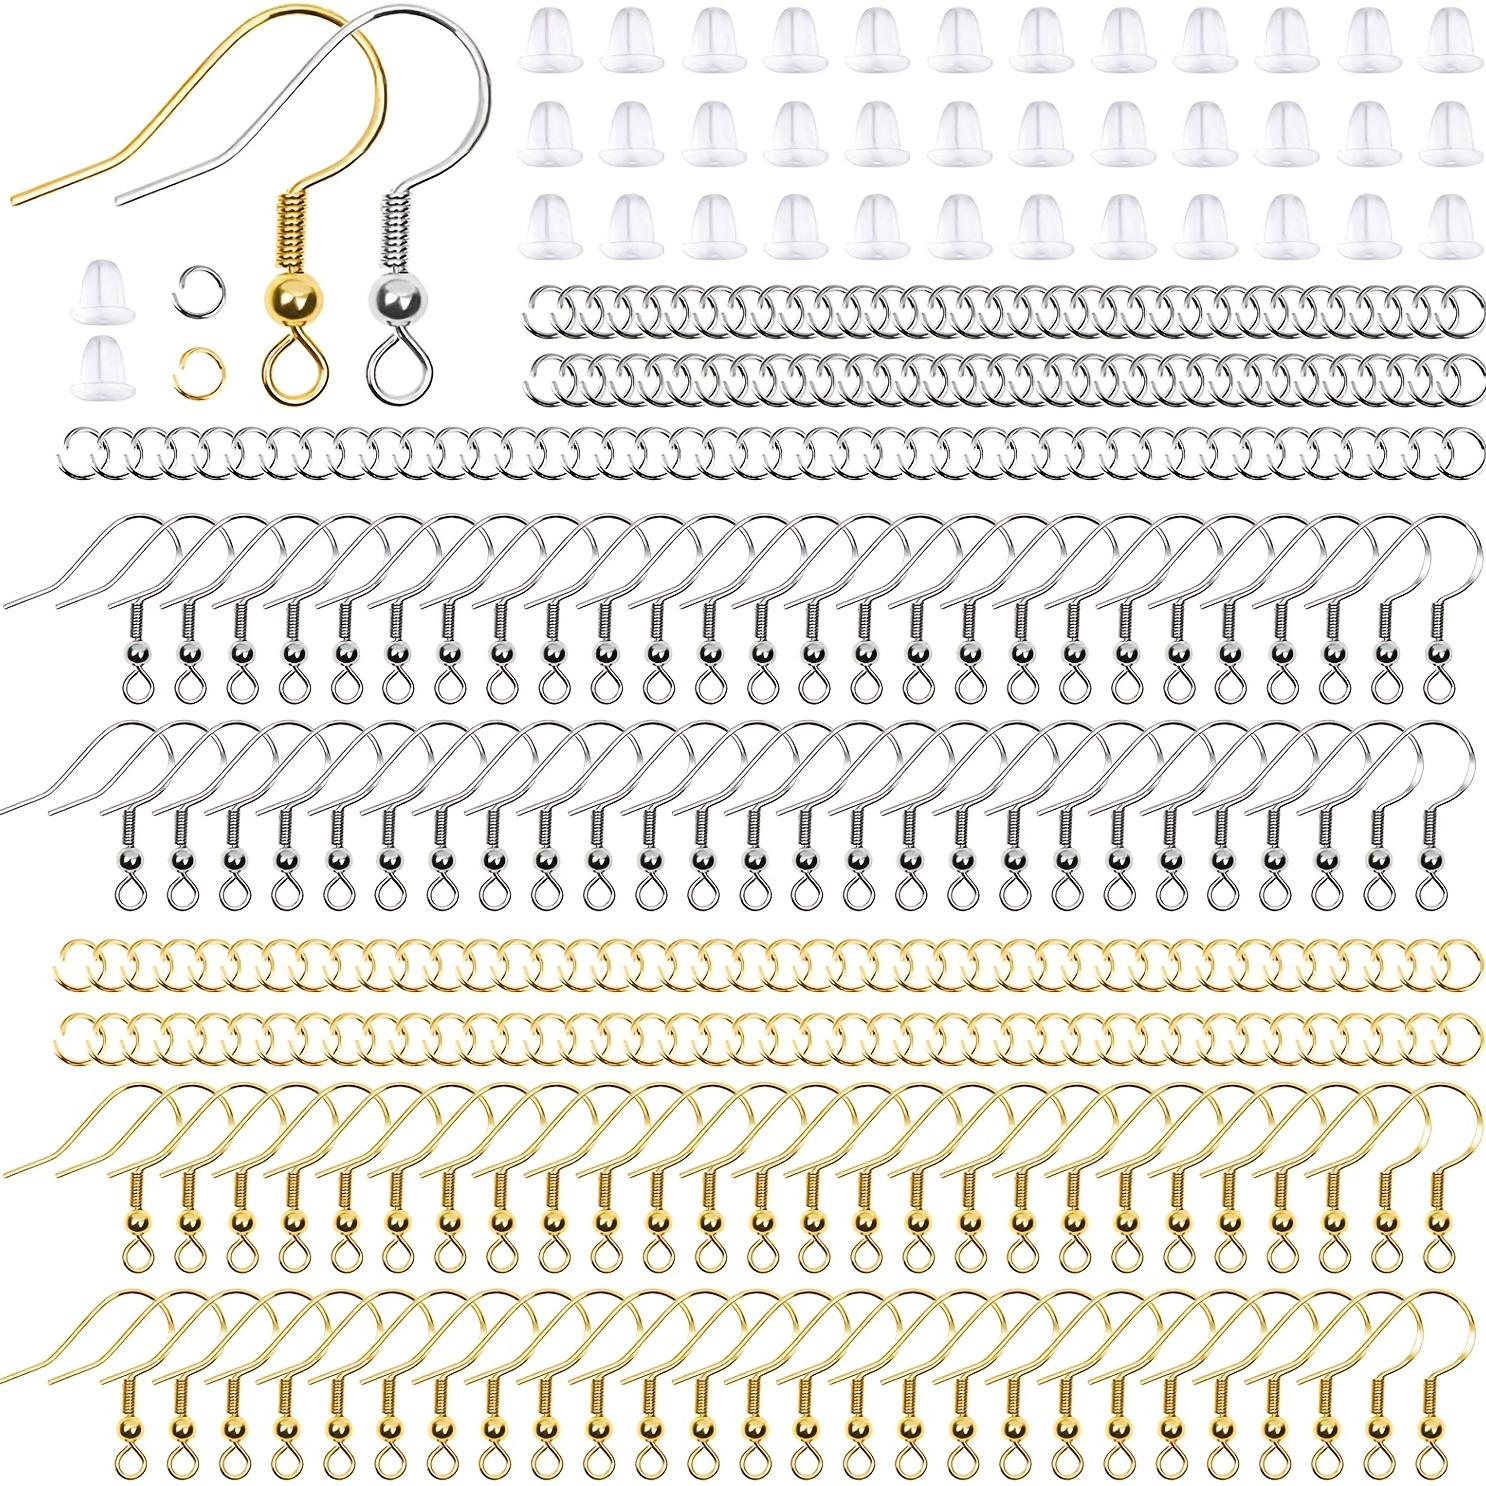 Hypoallergenic Earring Making Kit, 2000Pcs Earring Making Supplies Kit with  Hypoallergenic Earring Hooks, Earring Findings, Earring Backs, Earring Pins  Jump Rings for Jewelry Making Supplies 